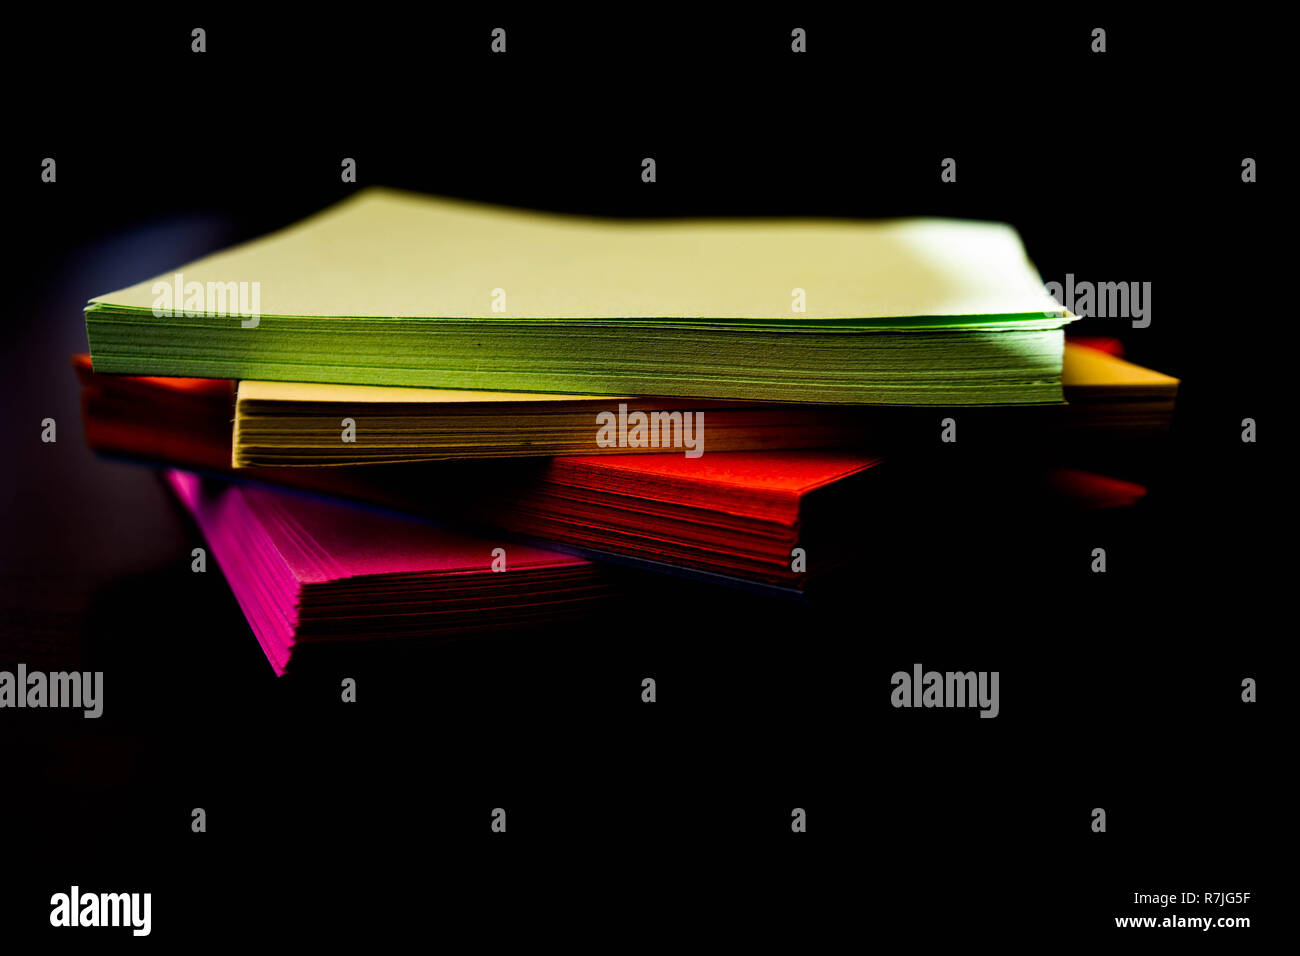 Four kinds of coloured sticky notes in formation Stock Photo